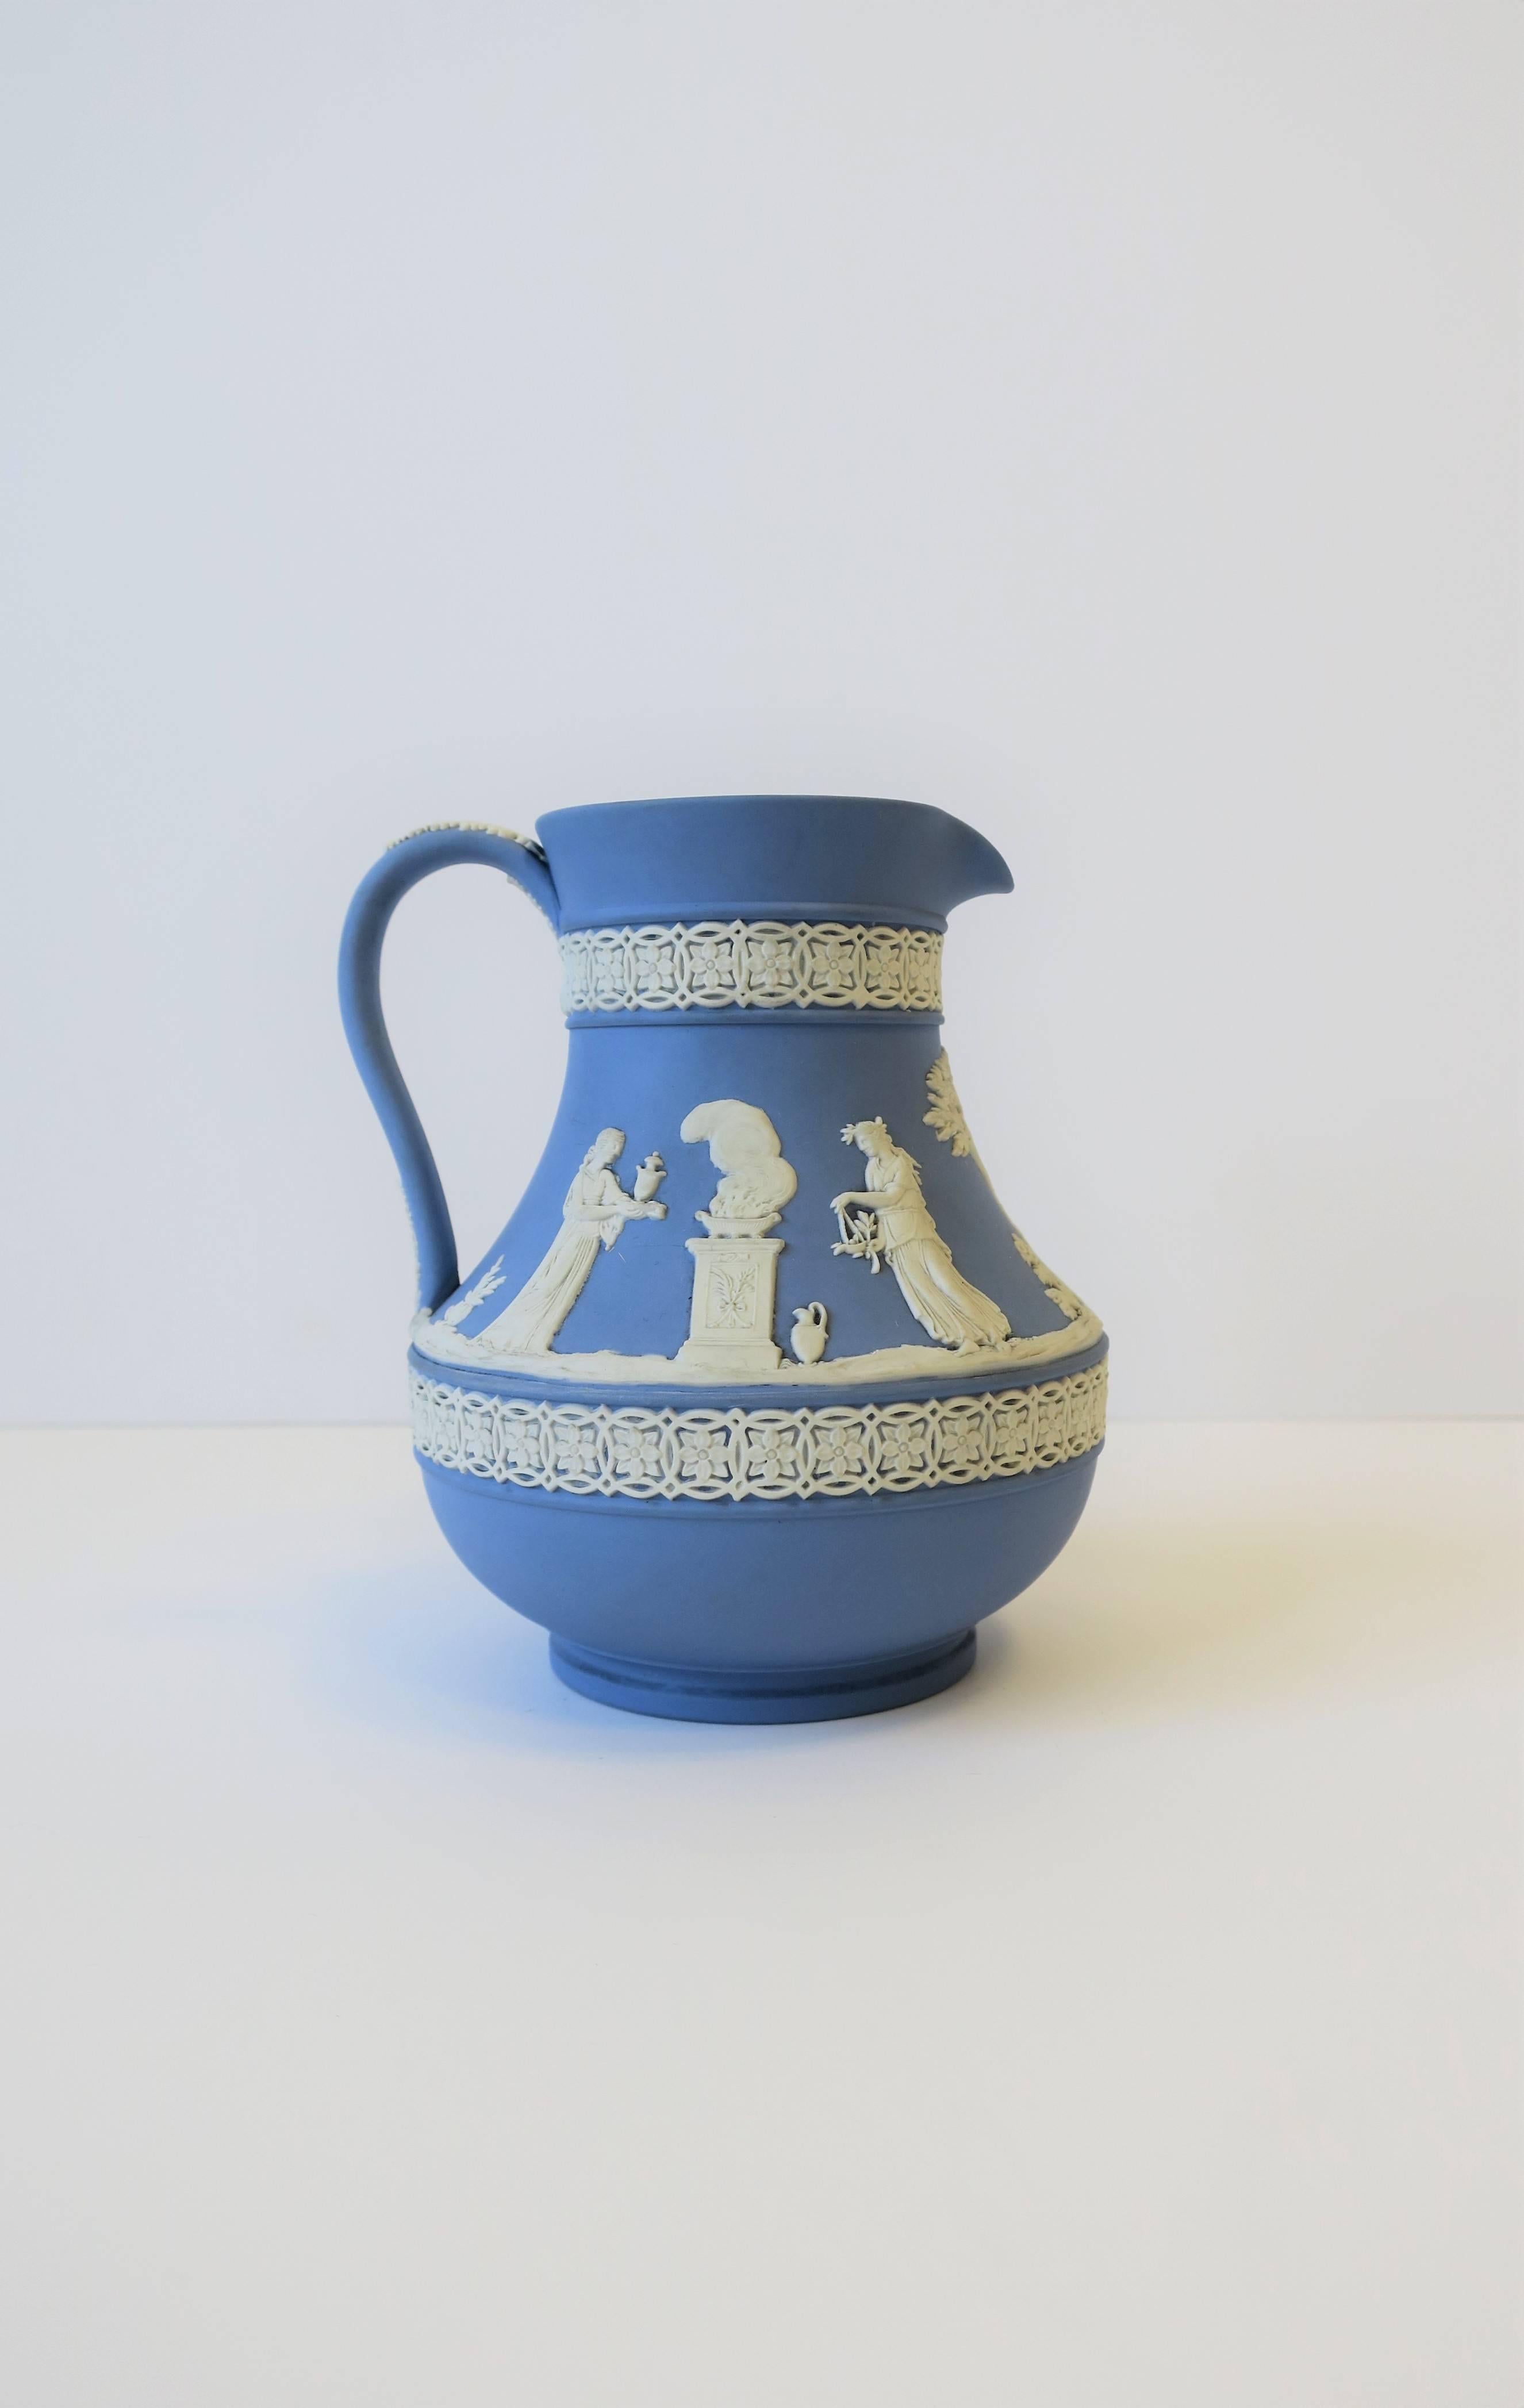 A beautiful mid-20th century English Wedgwood blue and white jasperware pitcher in the neoclassical style, 1951, England. A beautiful raised white relief around pitcher/vessel. Maker's mark and other markings on bottom as show in image #10.